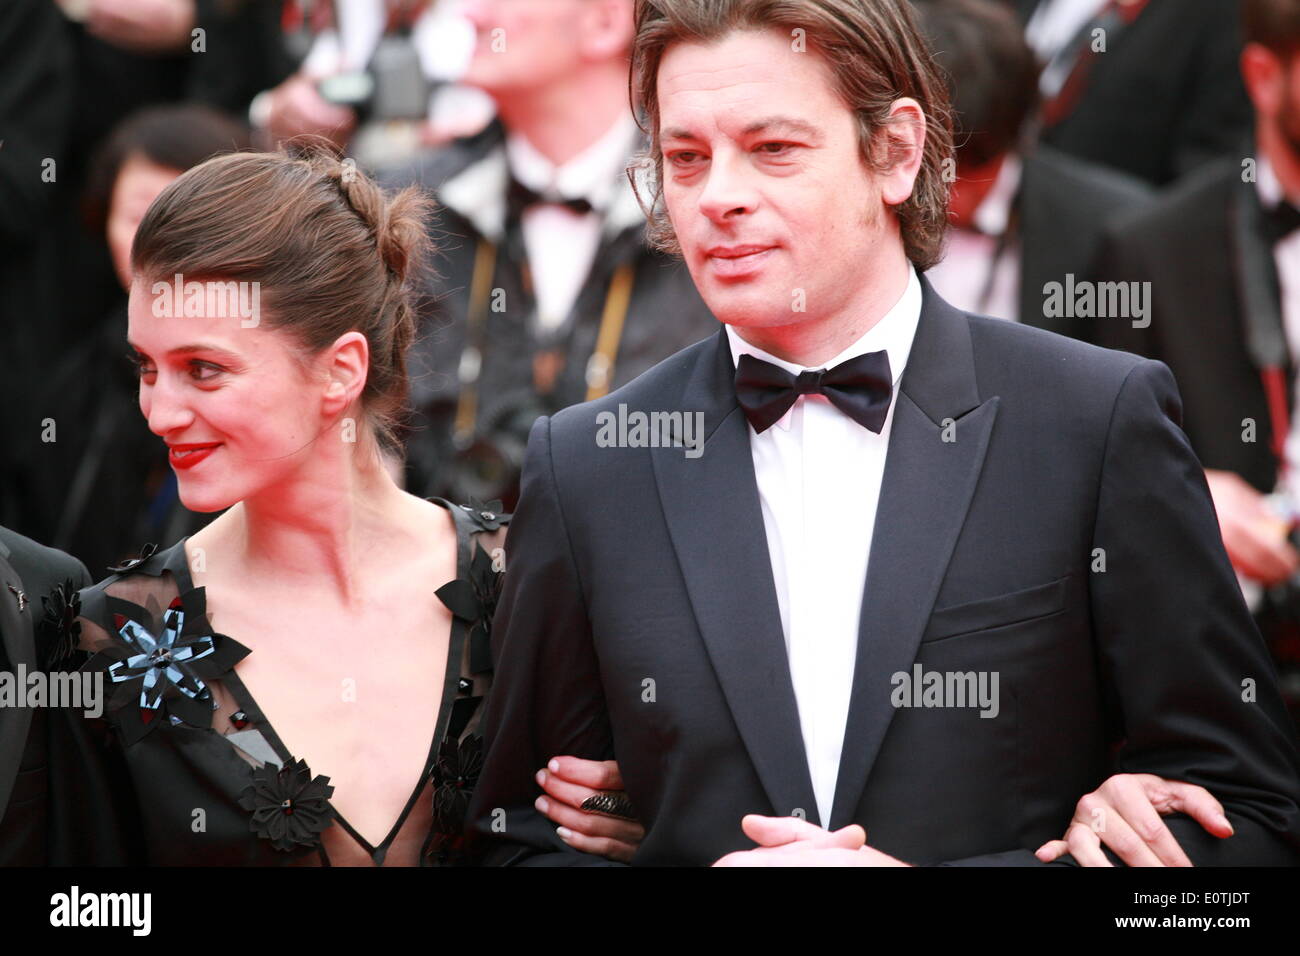 Cannes, France. 19th May 2014. Barbara Probst and Benjamin Biolay at the Foxcatcher gala screening red carpet at the 67th Cannes Film Festival France. Monday 19th May 2014 in Cannes Film Festival, France. Credit:  Doreen Kennedy/Alamy Live News Stock Photo